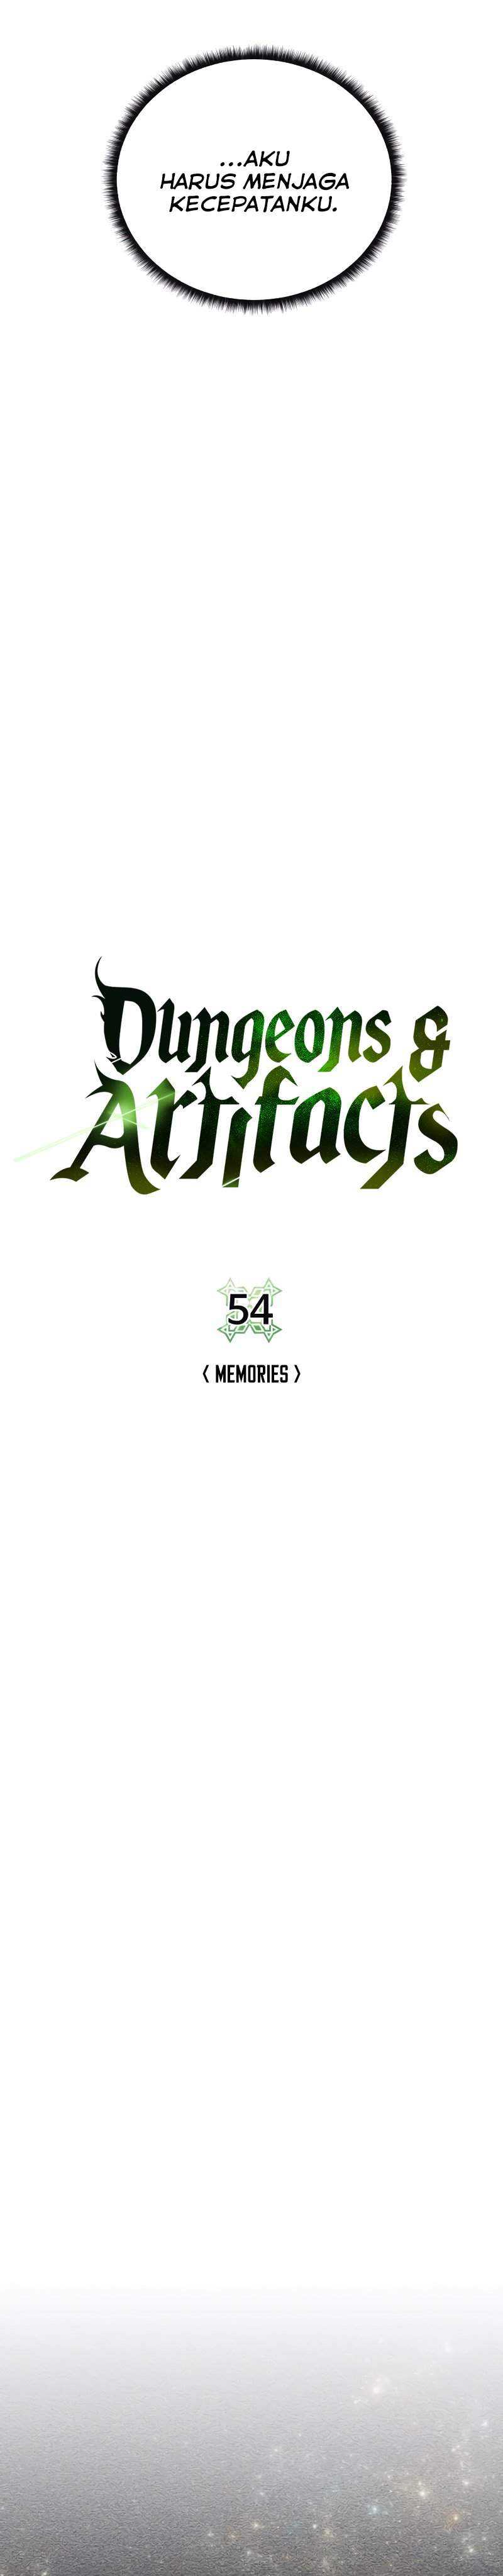 dungeons-artifacts Chapter chapter-54